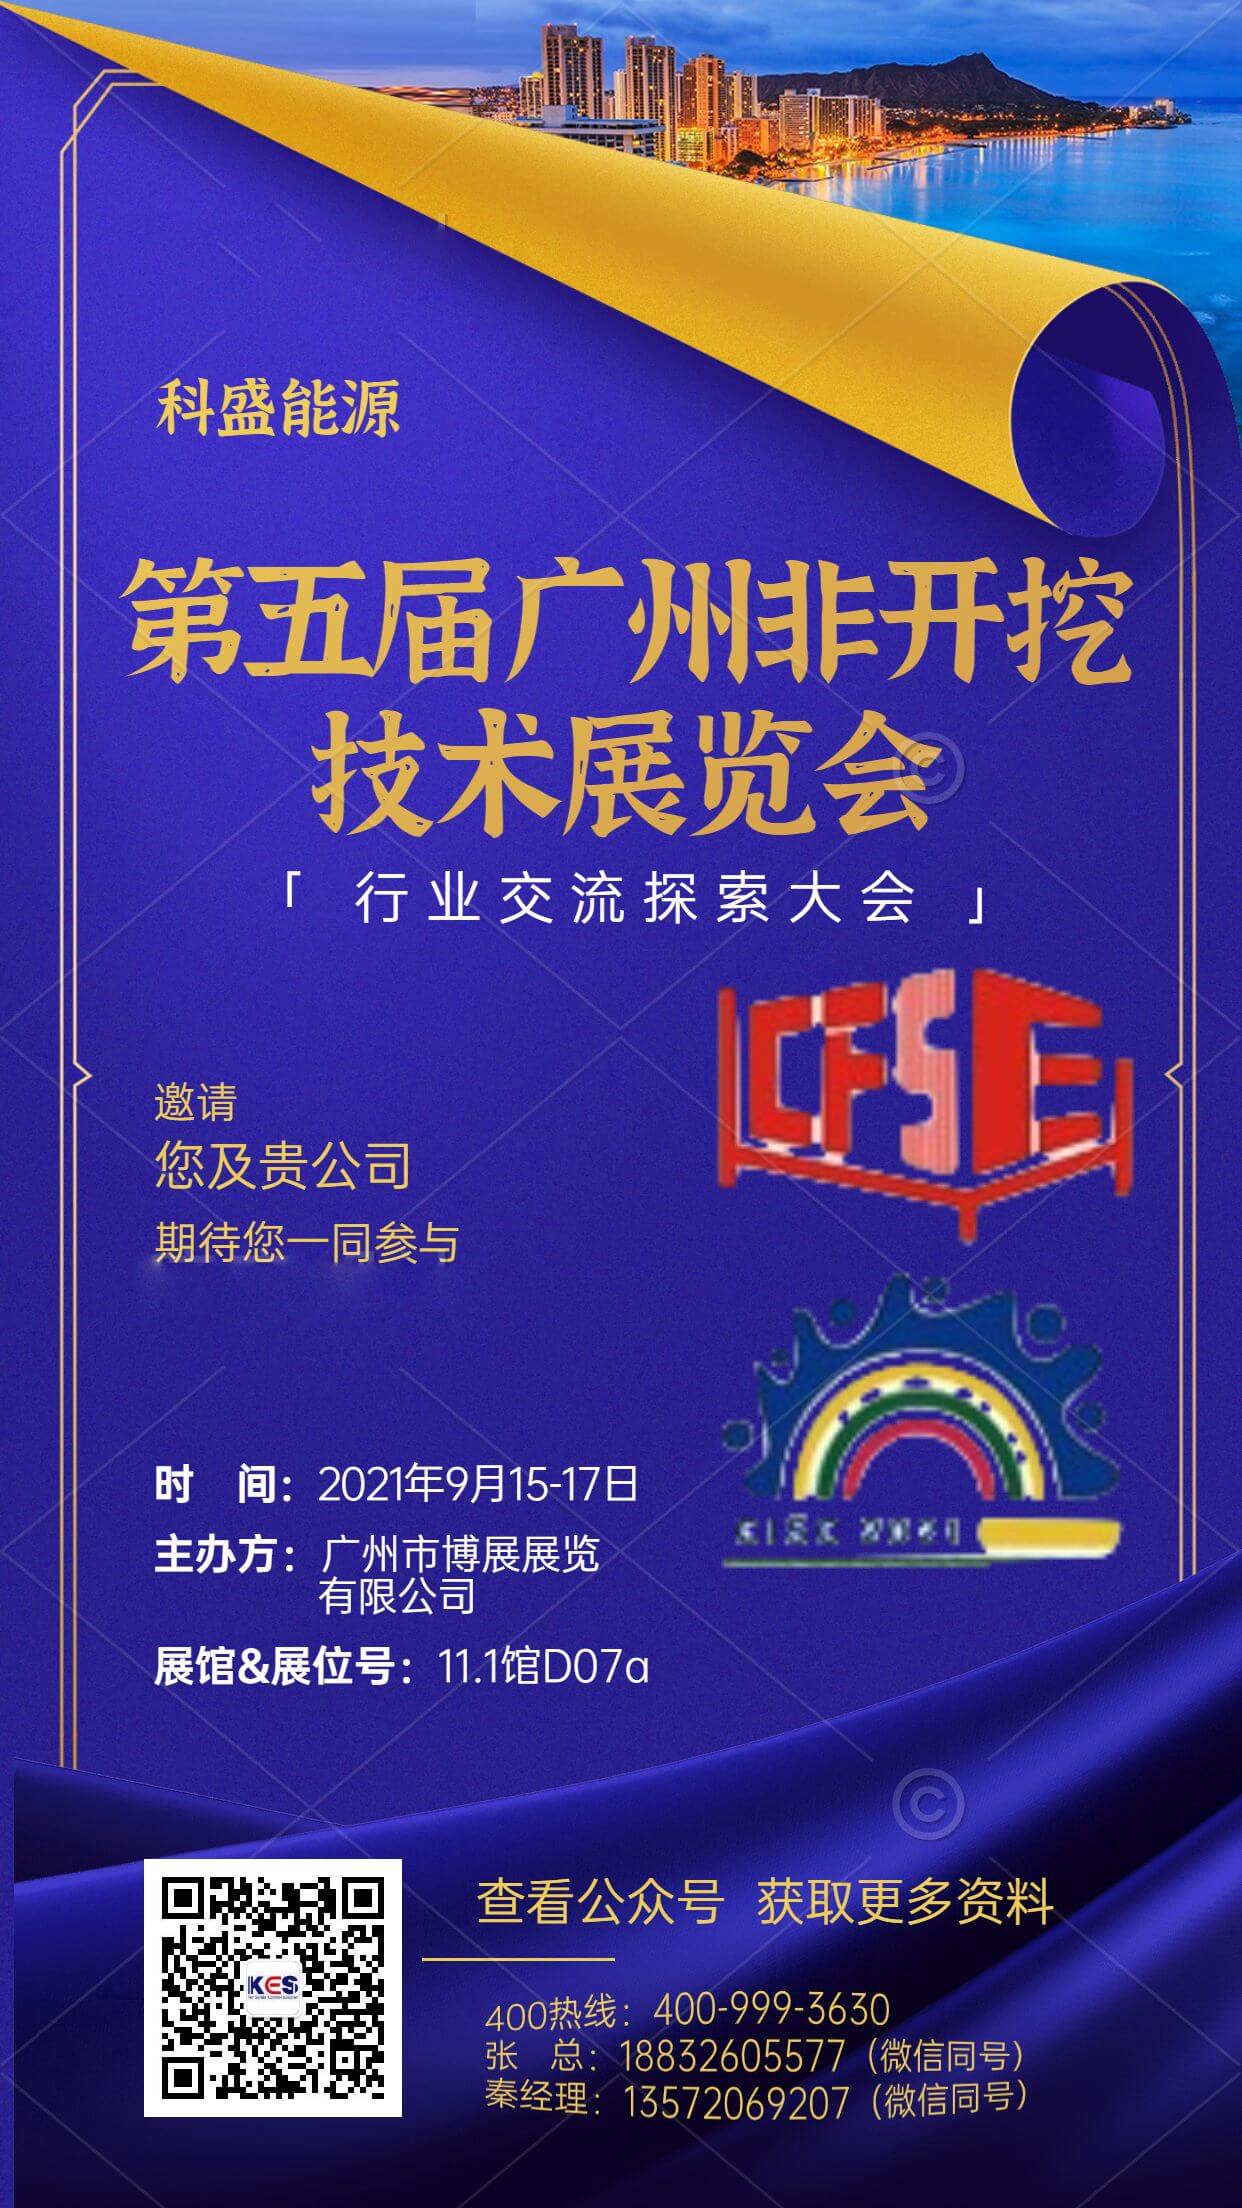 Invitation | You are cordially invited to participate in the 5th Guangzhou Trenchless Technology, Sponge City and 2021